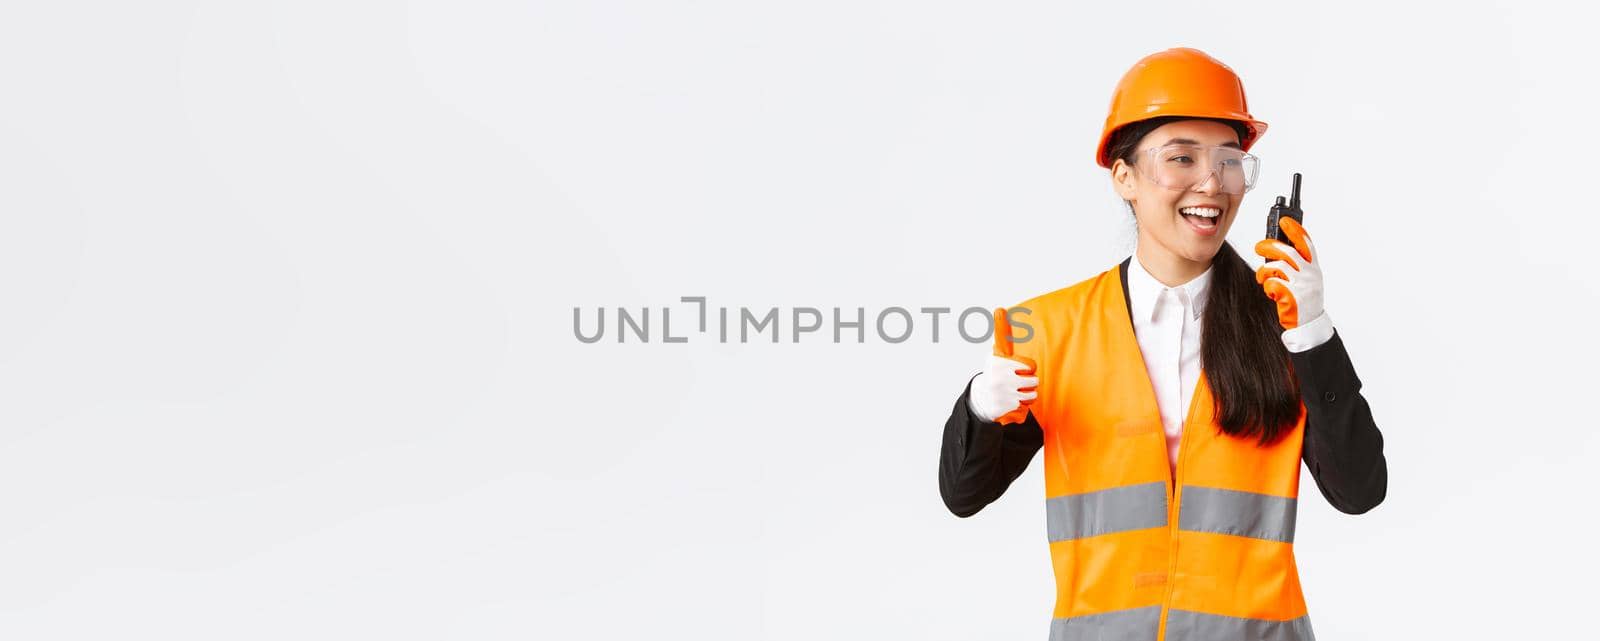 Satisfied happy smiling asian female engineer, industrial technician in safety helmet and uniform showing thumbs-up while praising great work using walkie-talkie, give permission to work.